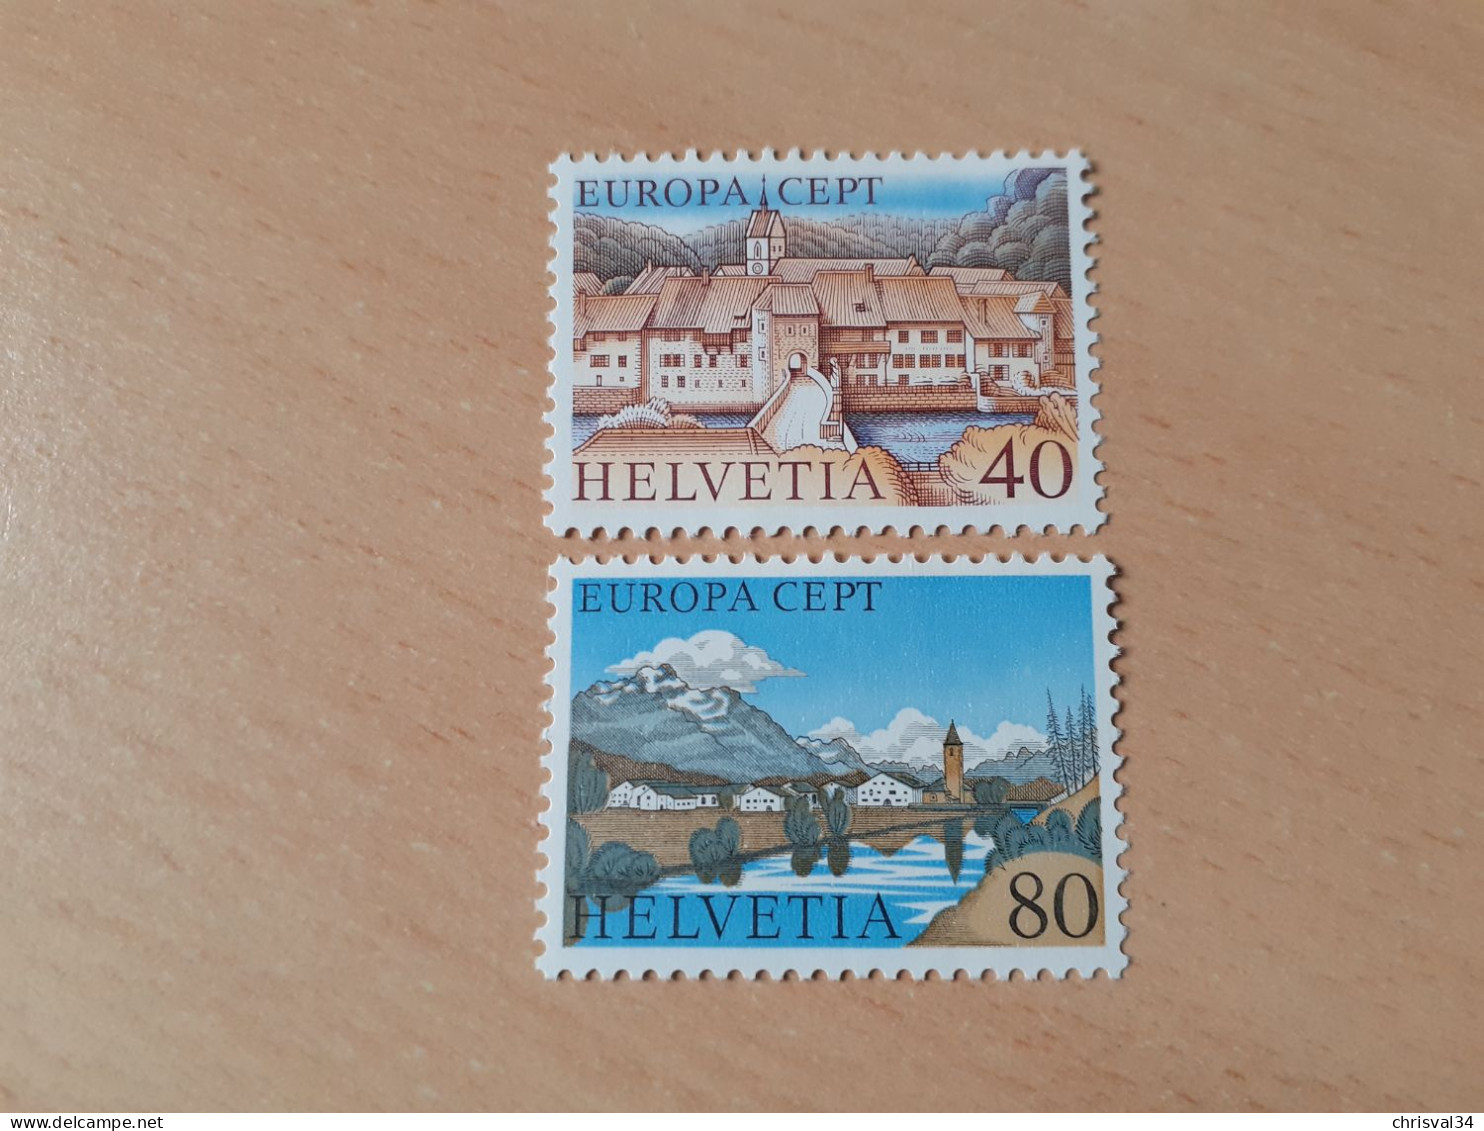 TIMBRES   SUISSE   ANNEE    1977   N  1024  /  1025   COTE  2,50  EUROS   NEUFS  LUXE** - Unused Stamps